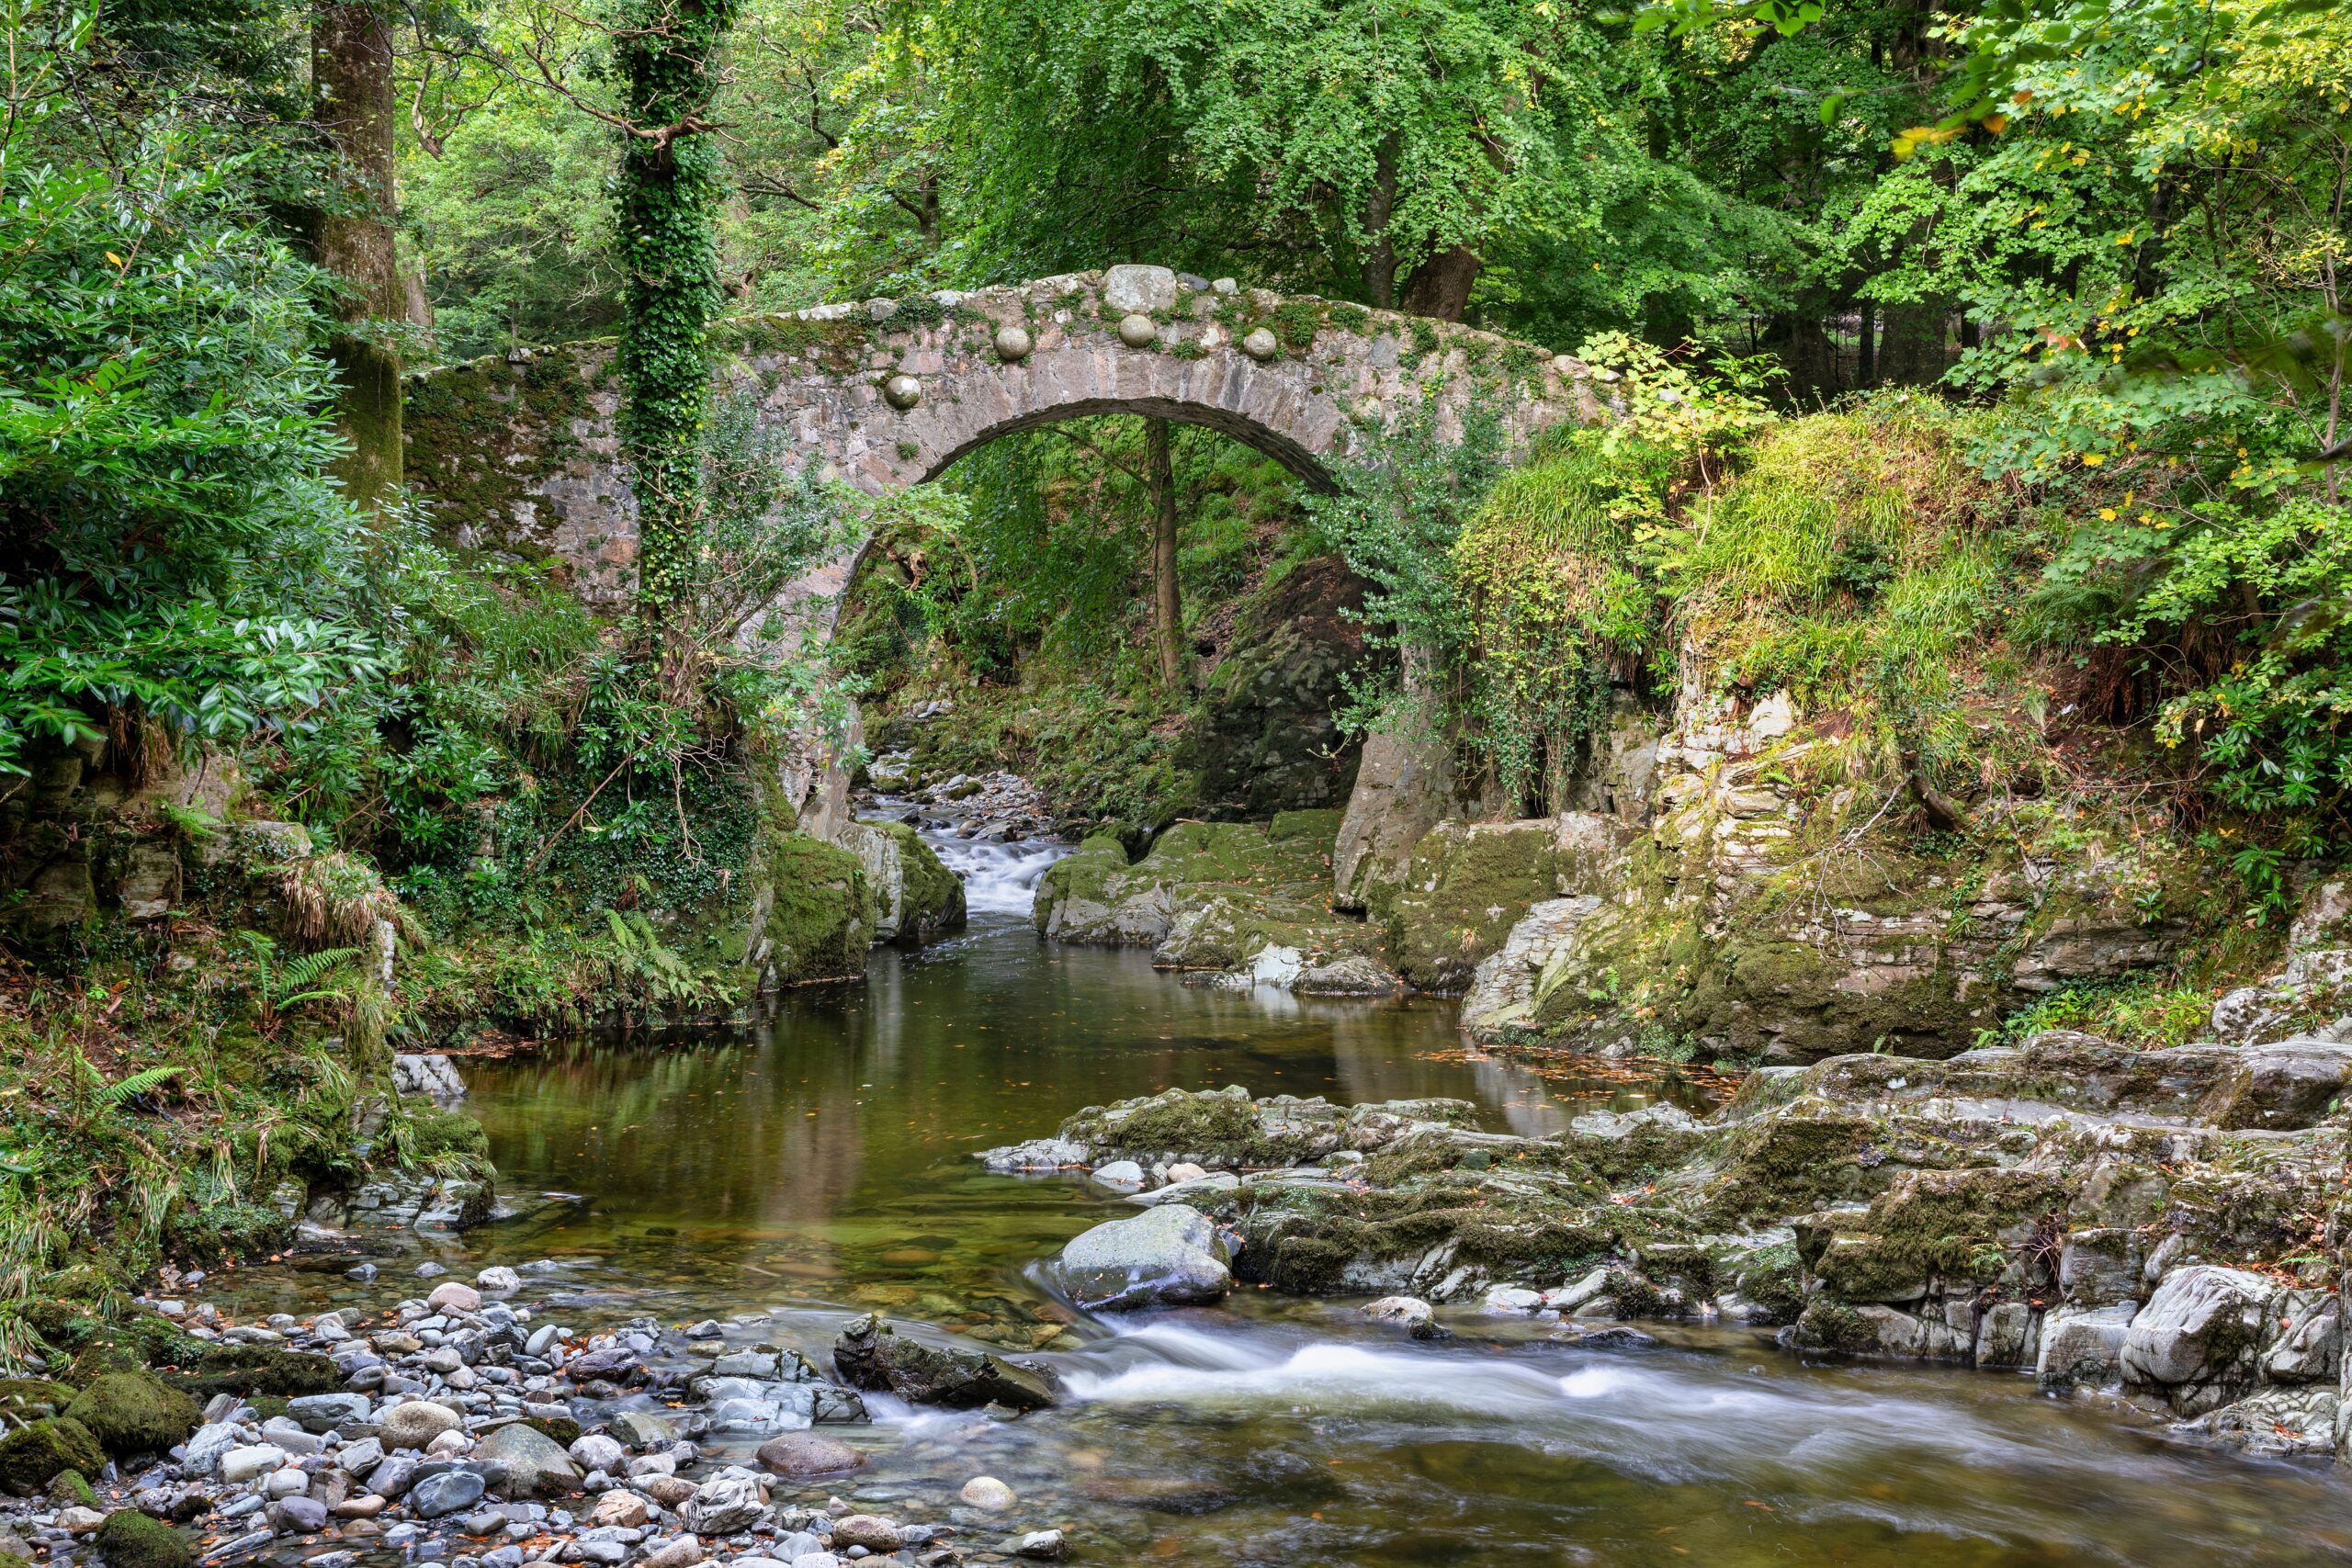 Beautiful stone bridge over a stream surrounded by greenery in Tollymore Forest Park, Northern Ireland